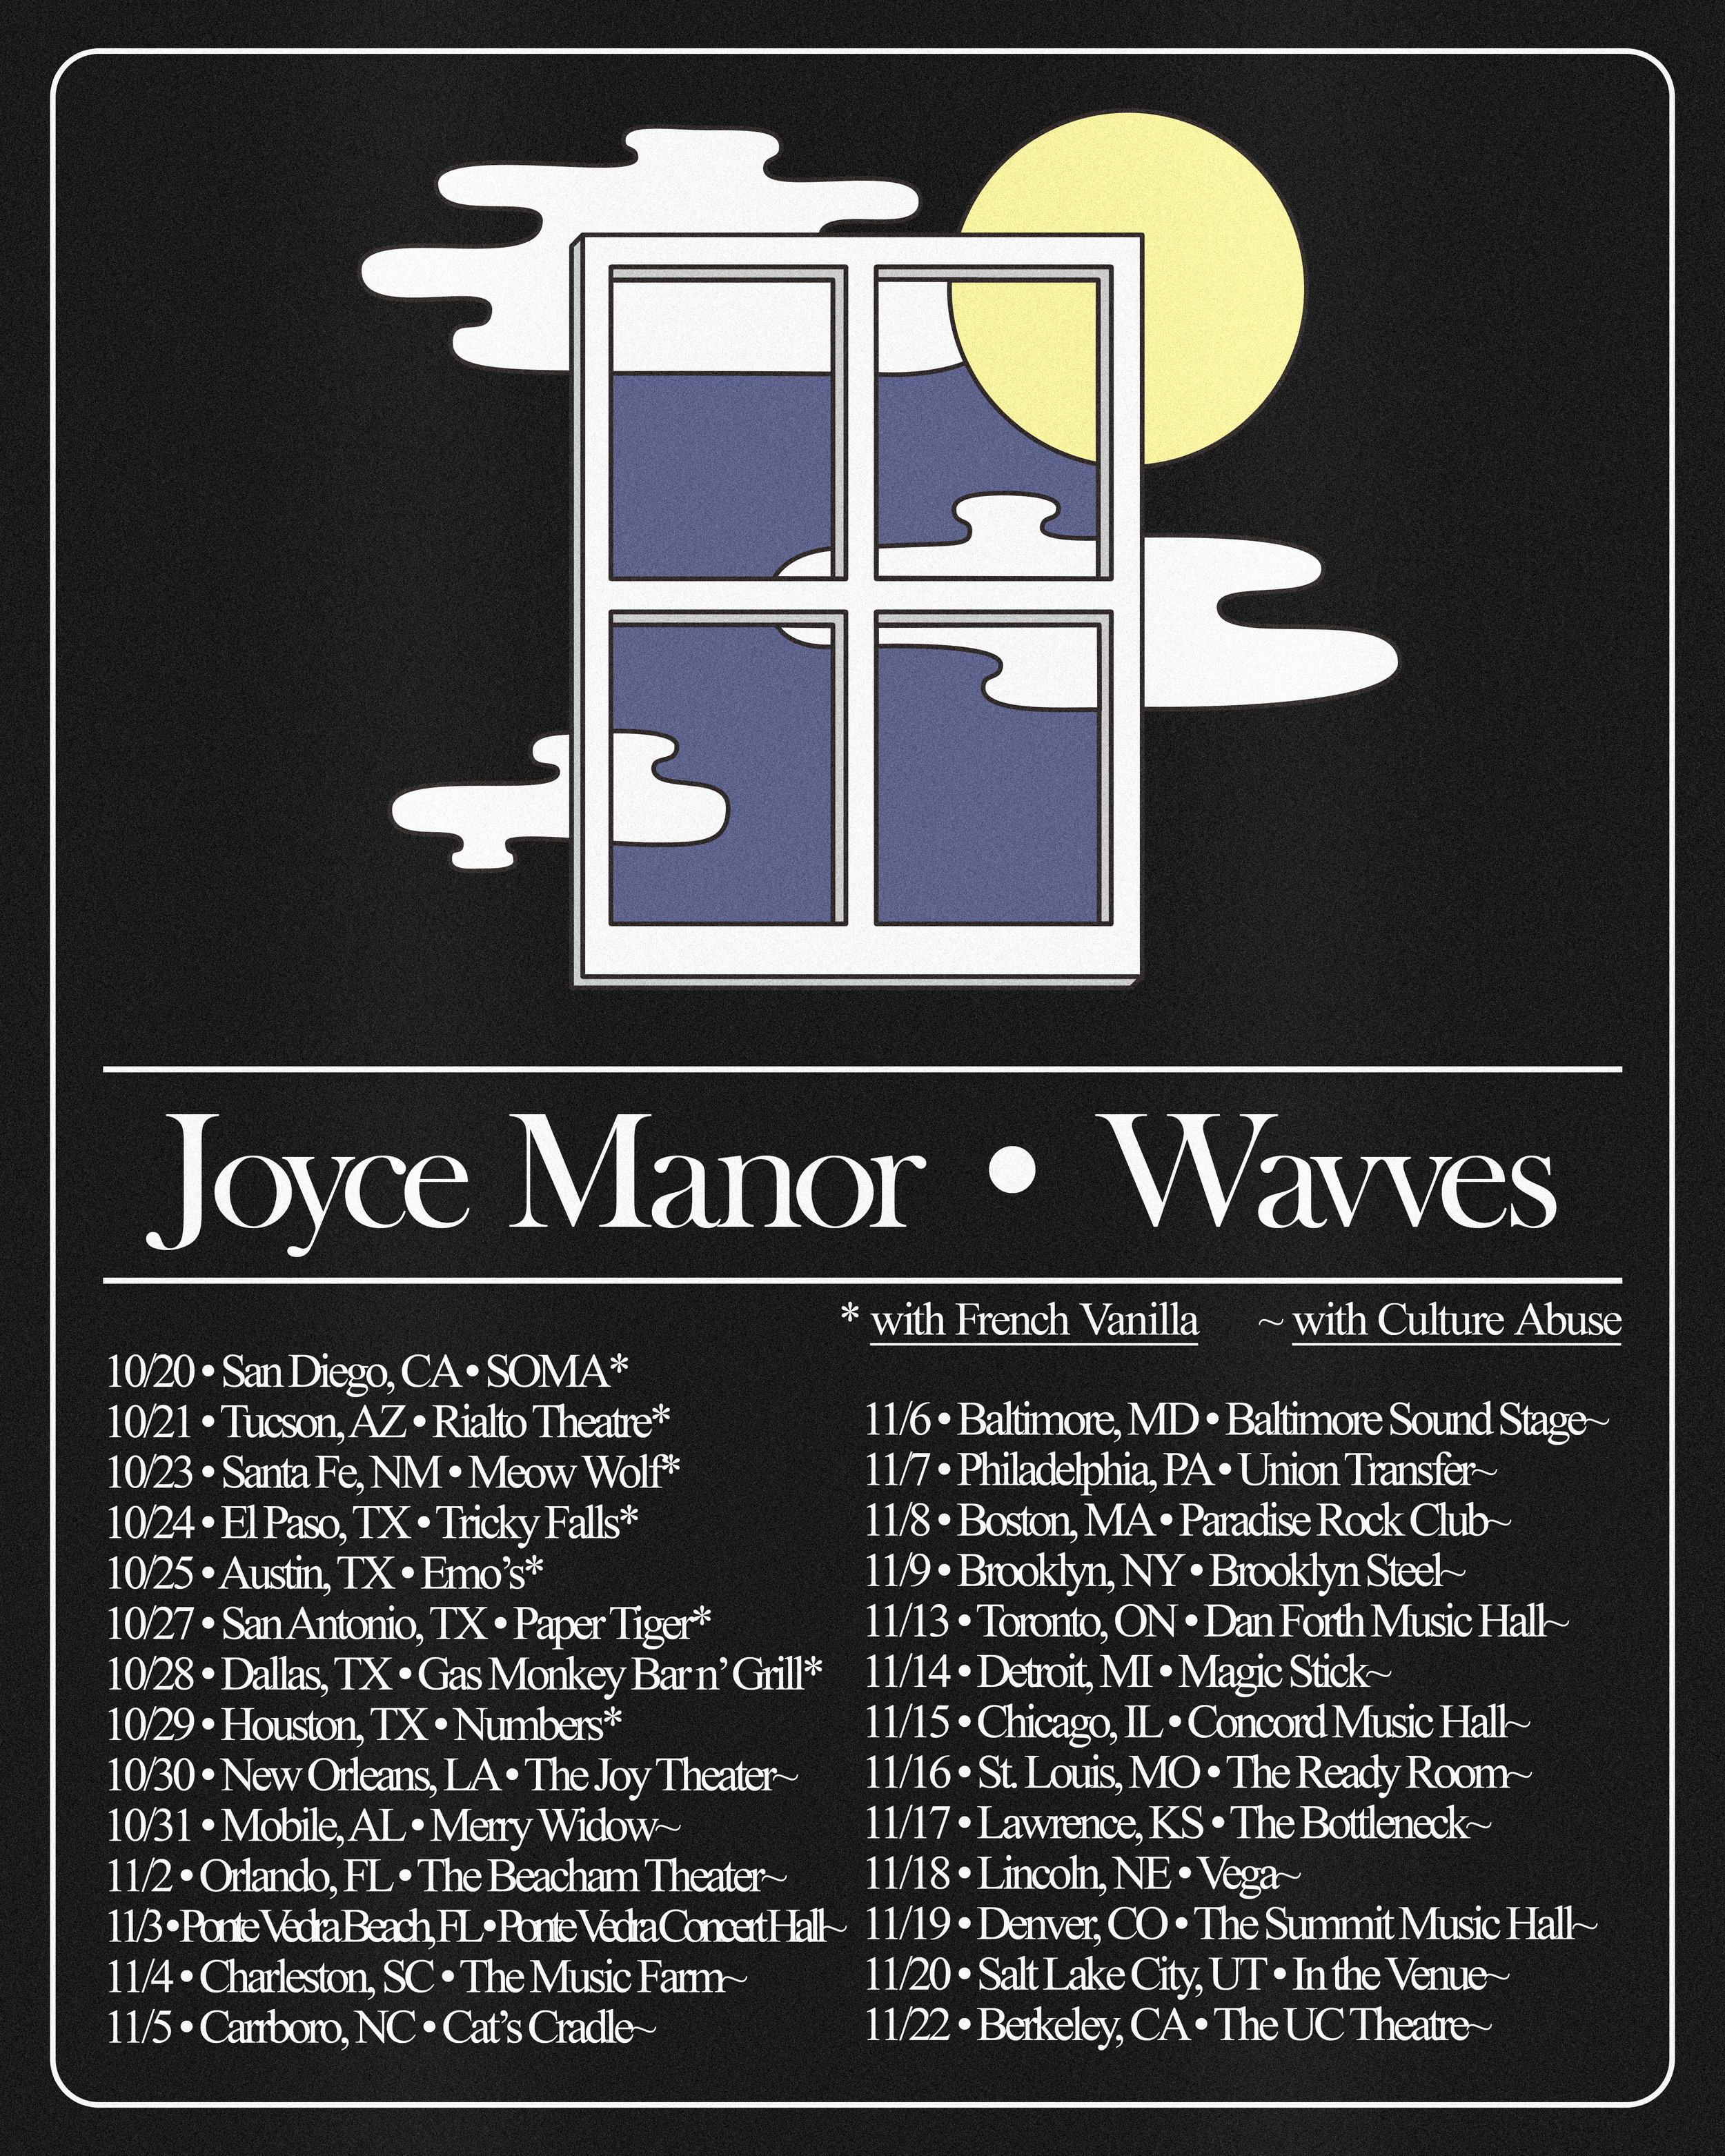 Tour poster for Joyce Manor + Wavves